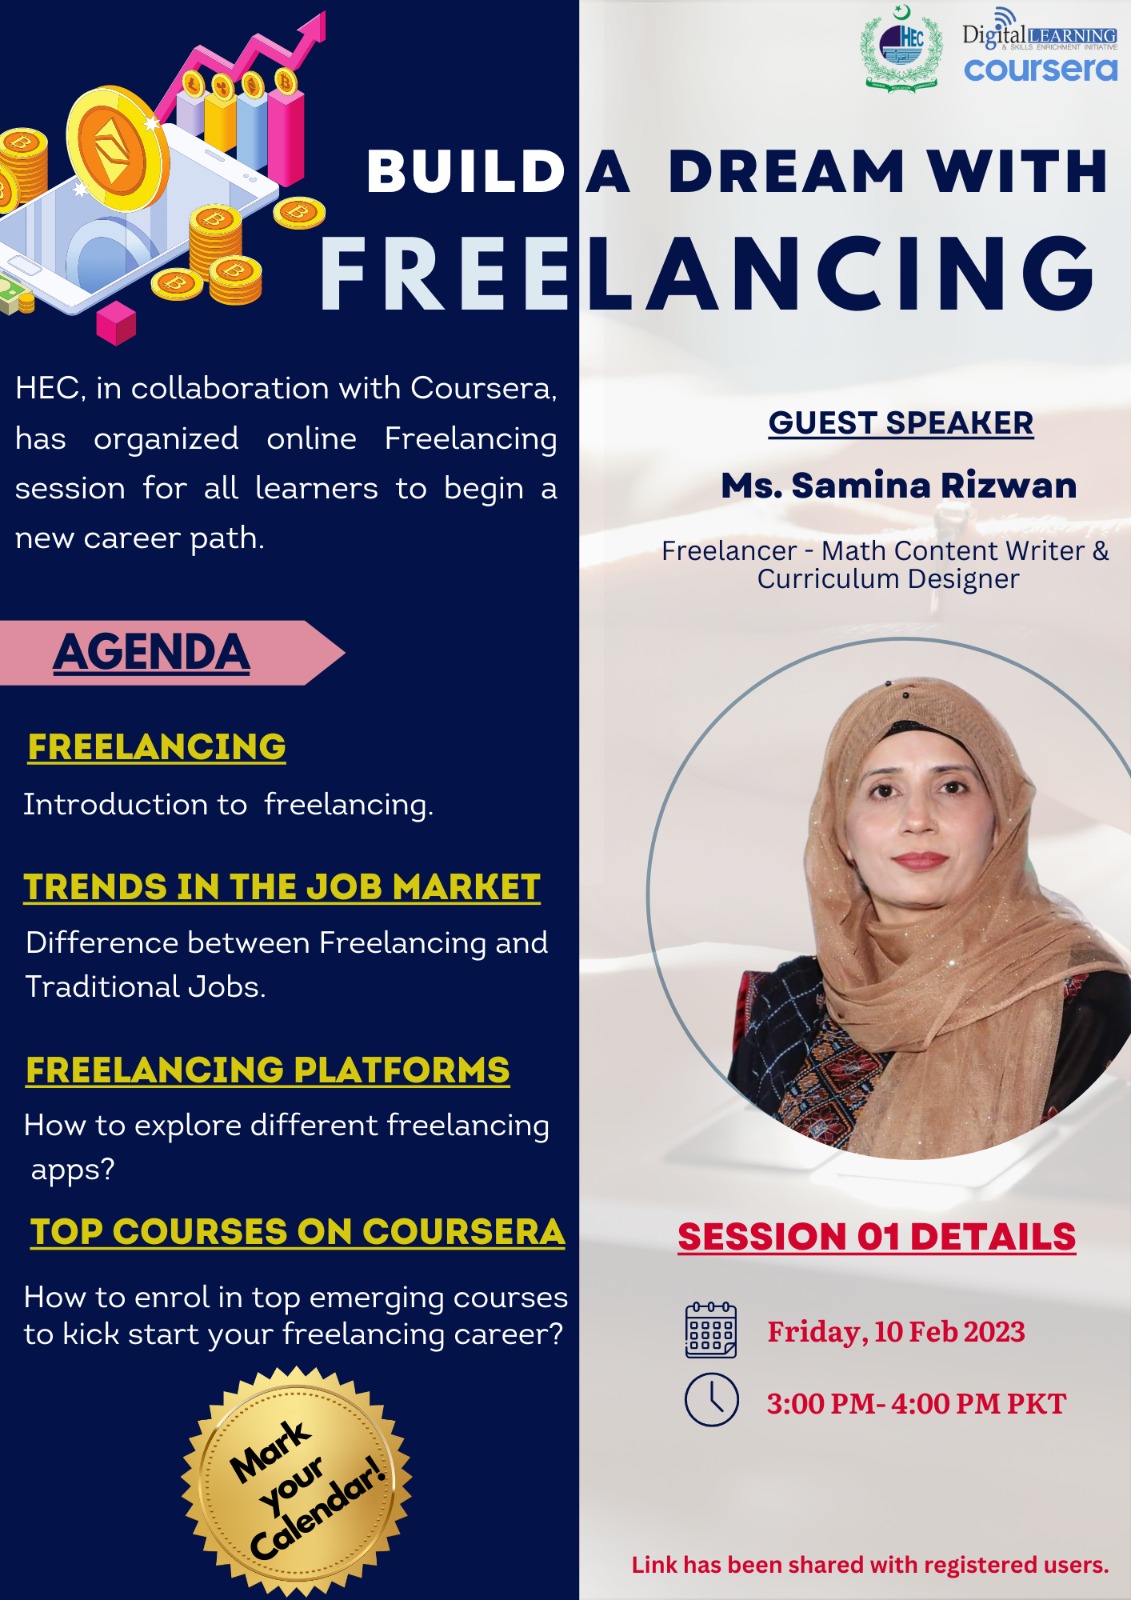 HEC online Freelancing webinar session in collaboration with Coursera